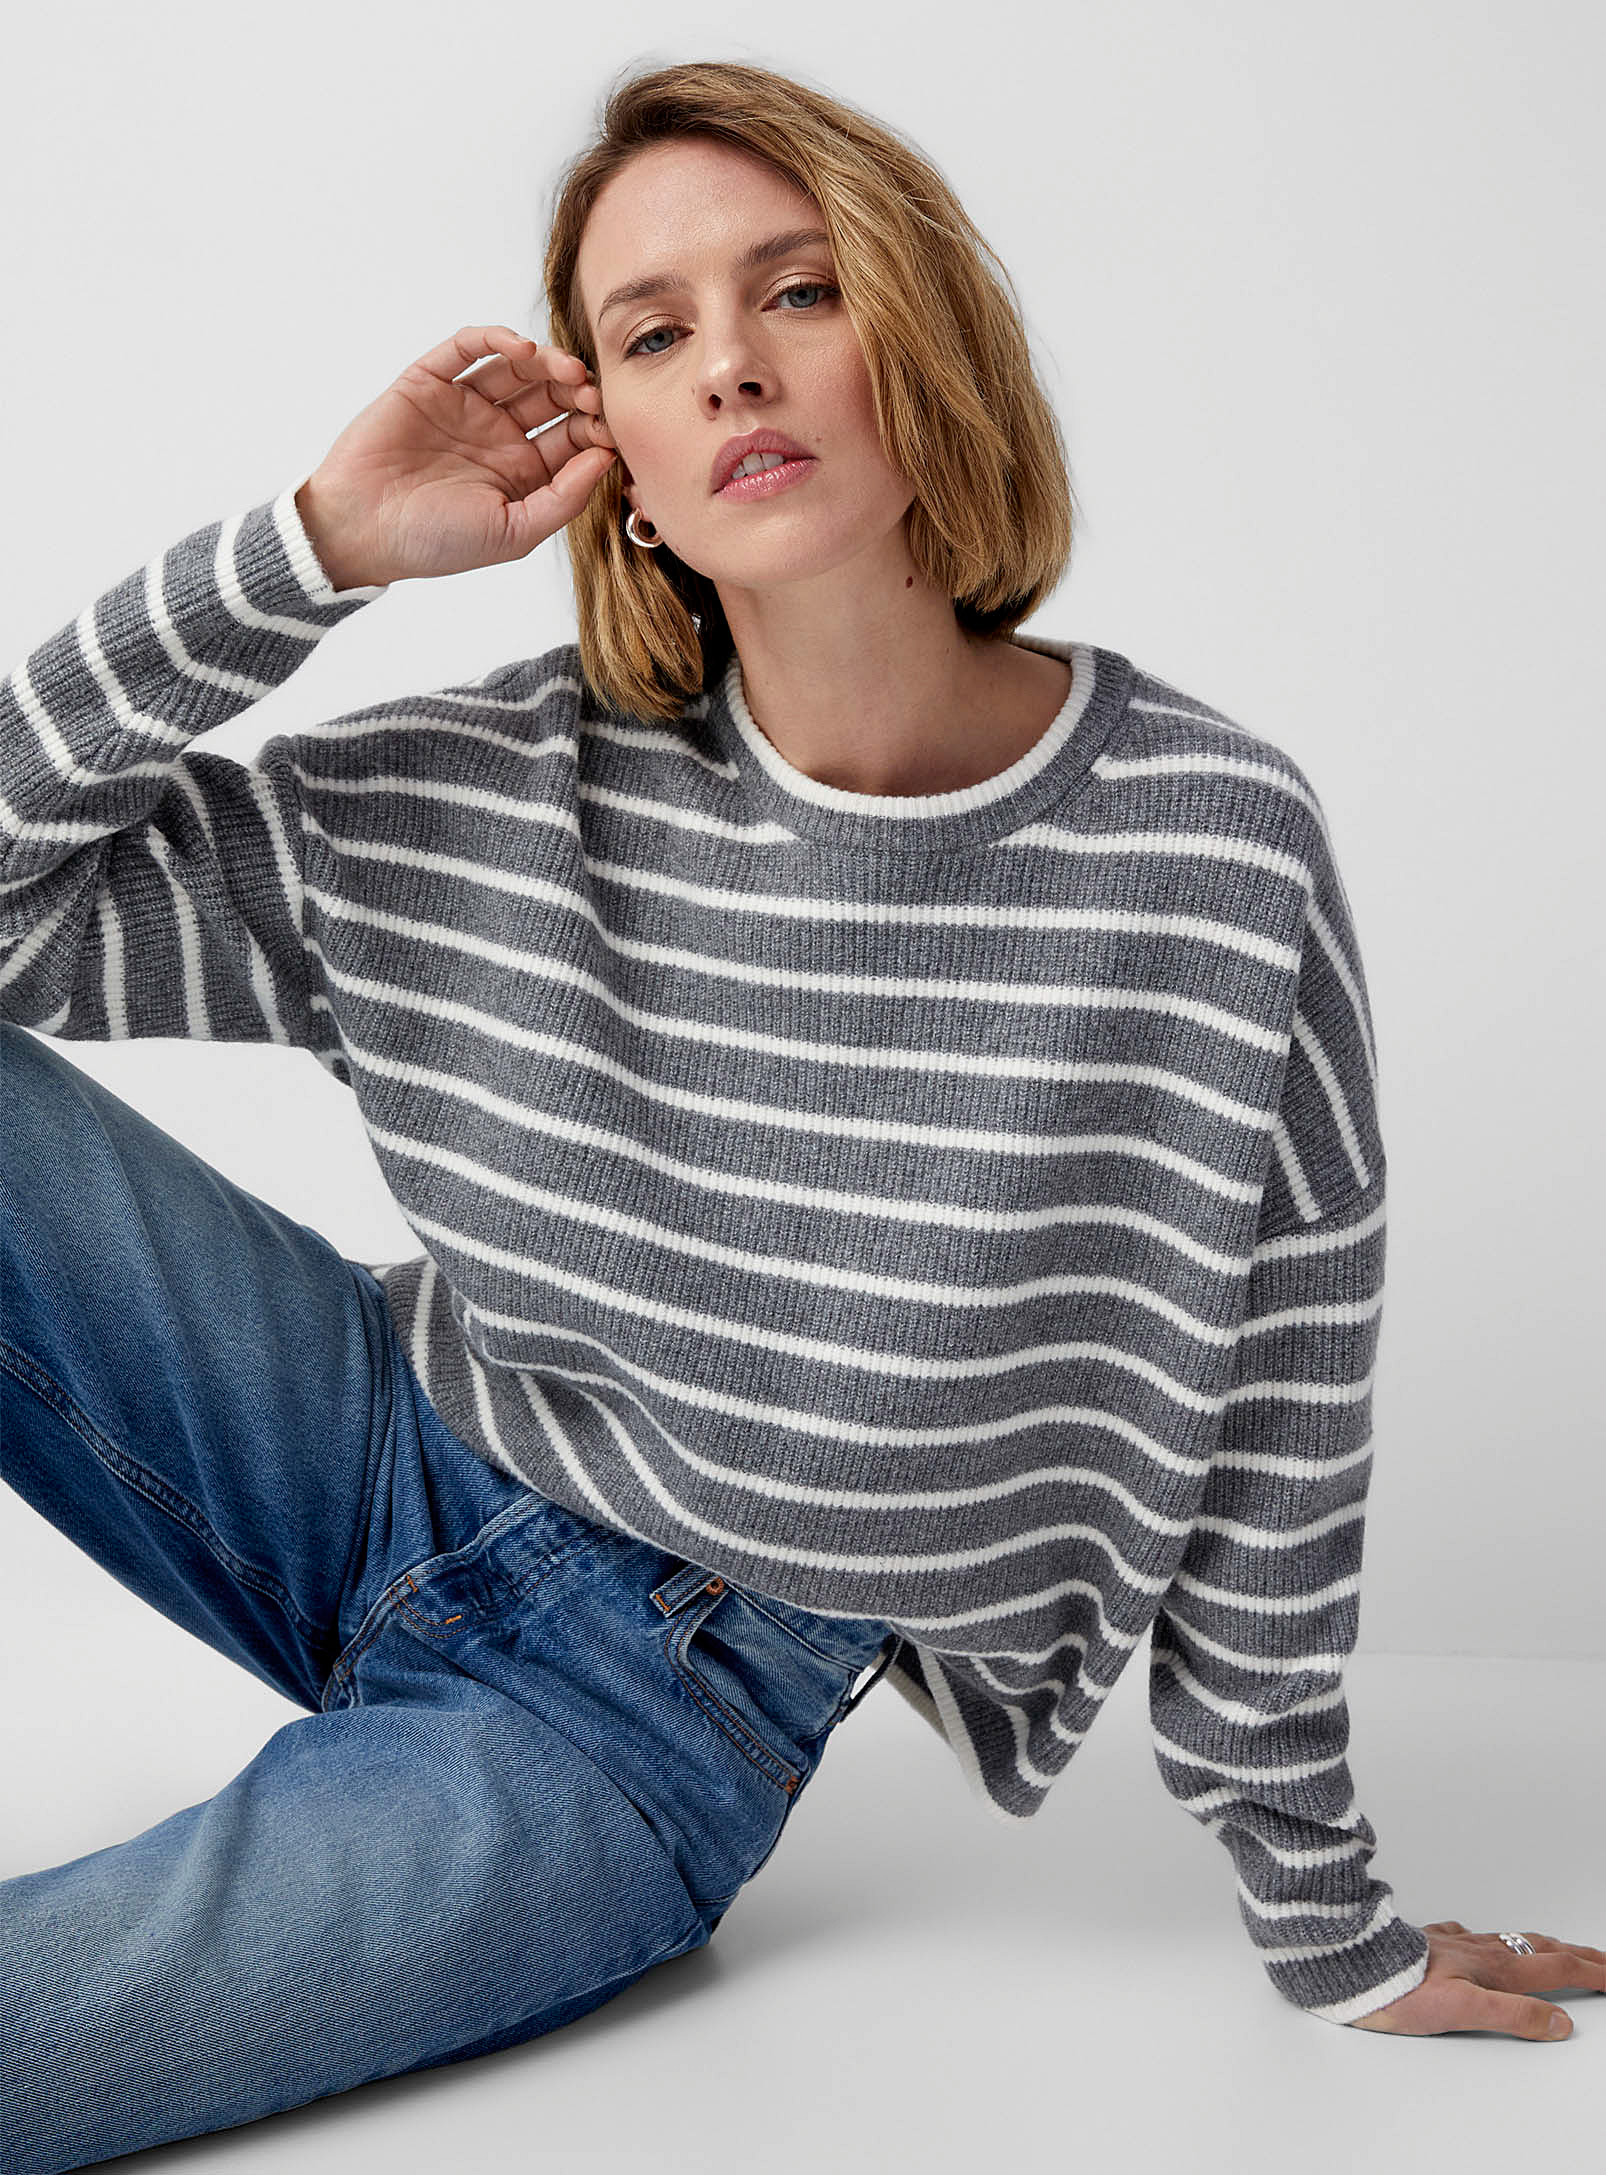 Contemporaine - Women's Striped loose ribbed sweater